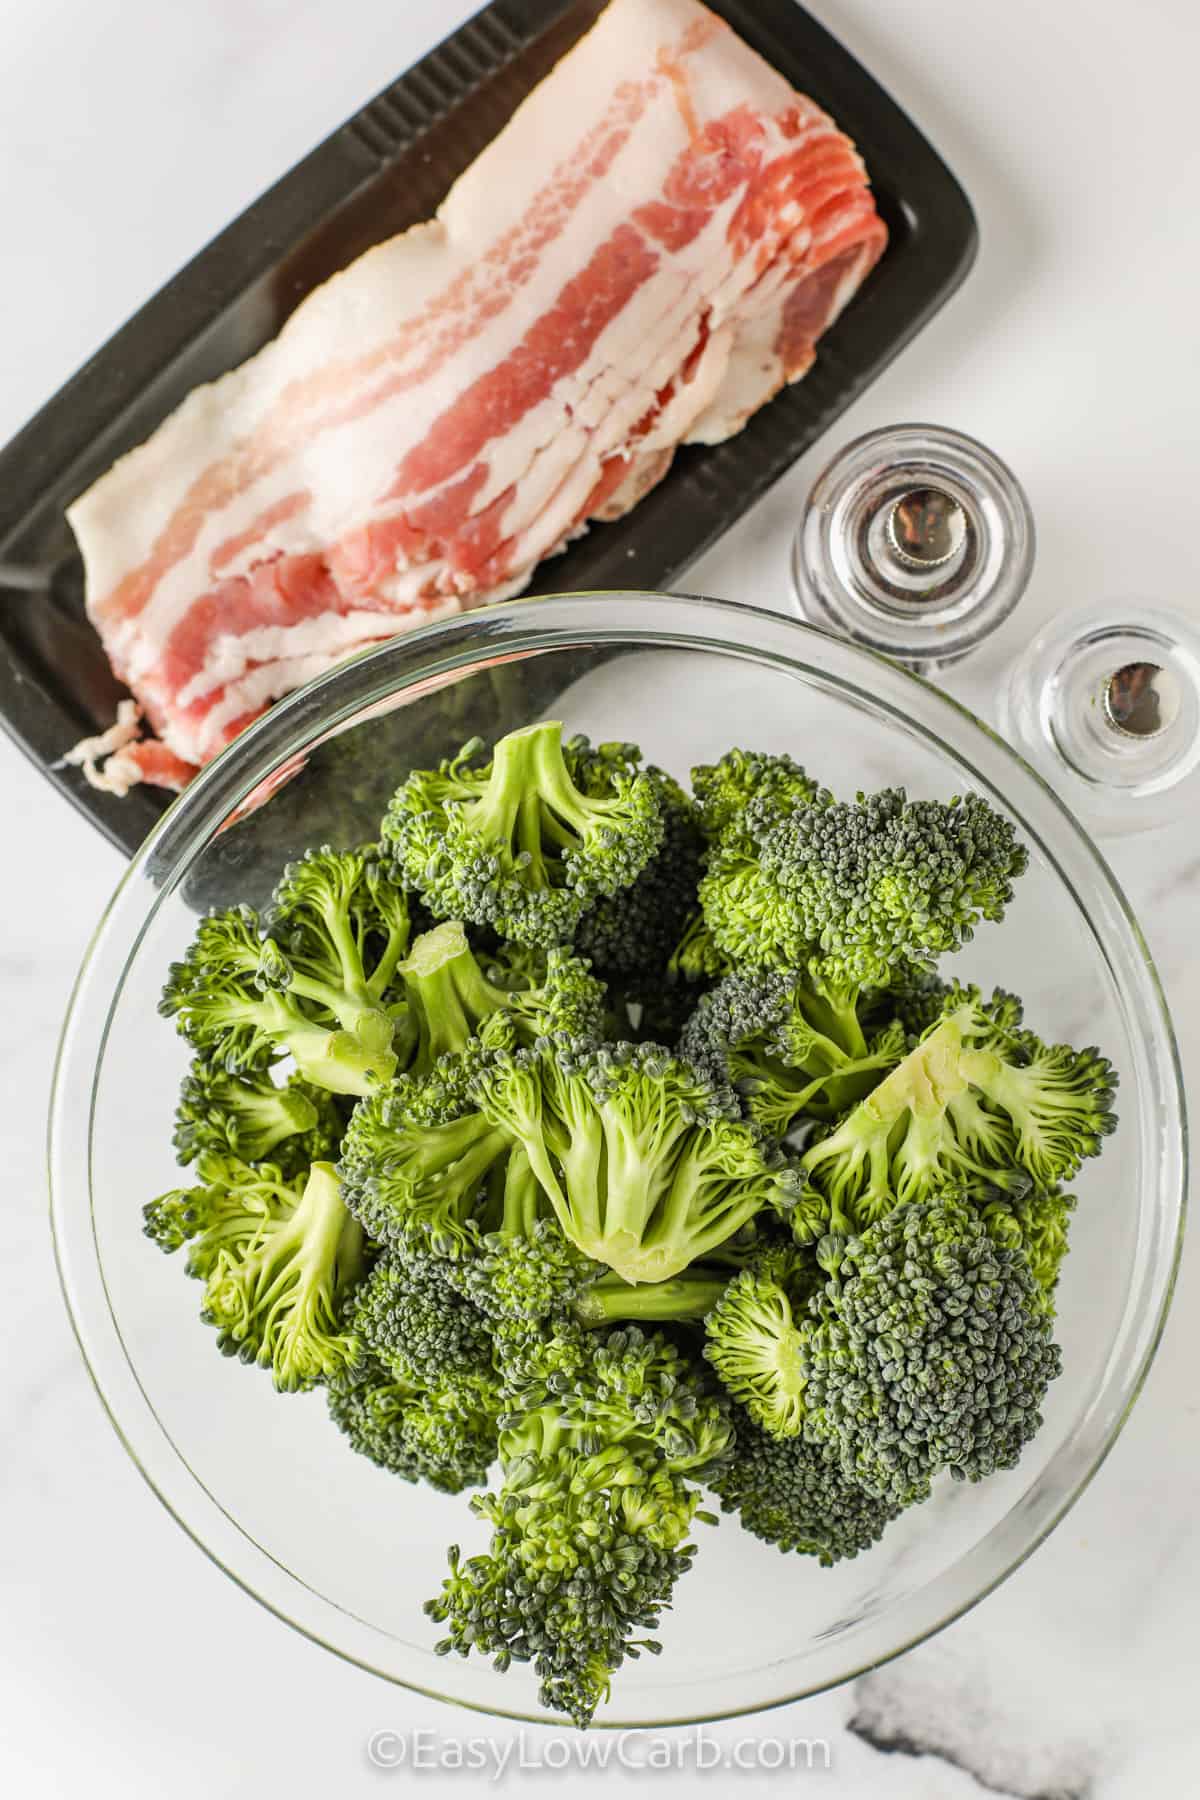 ingredients to make Bacon Broccoli Air Fryer Recipe